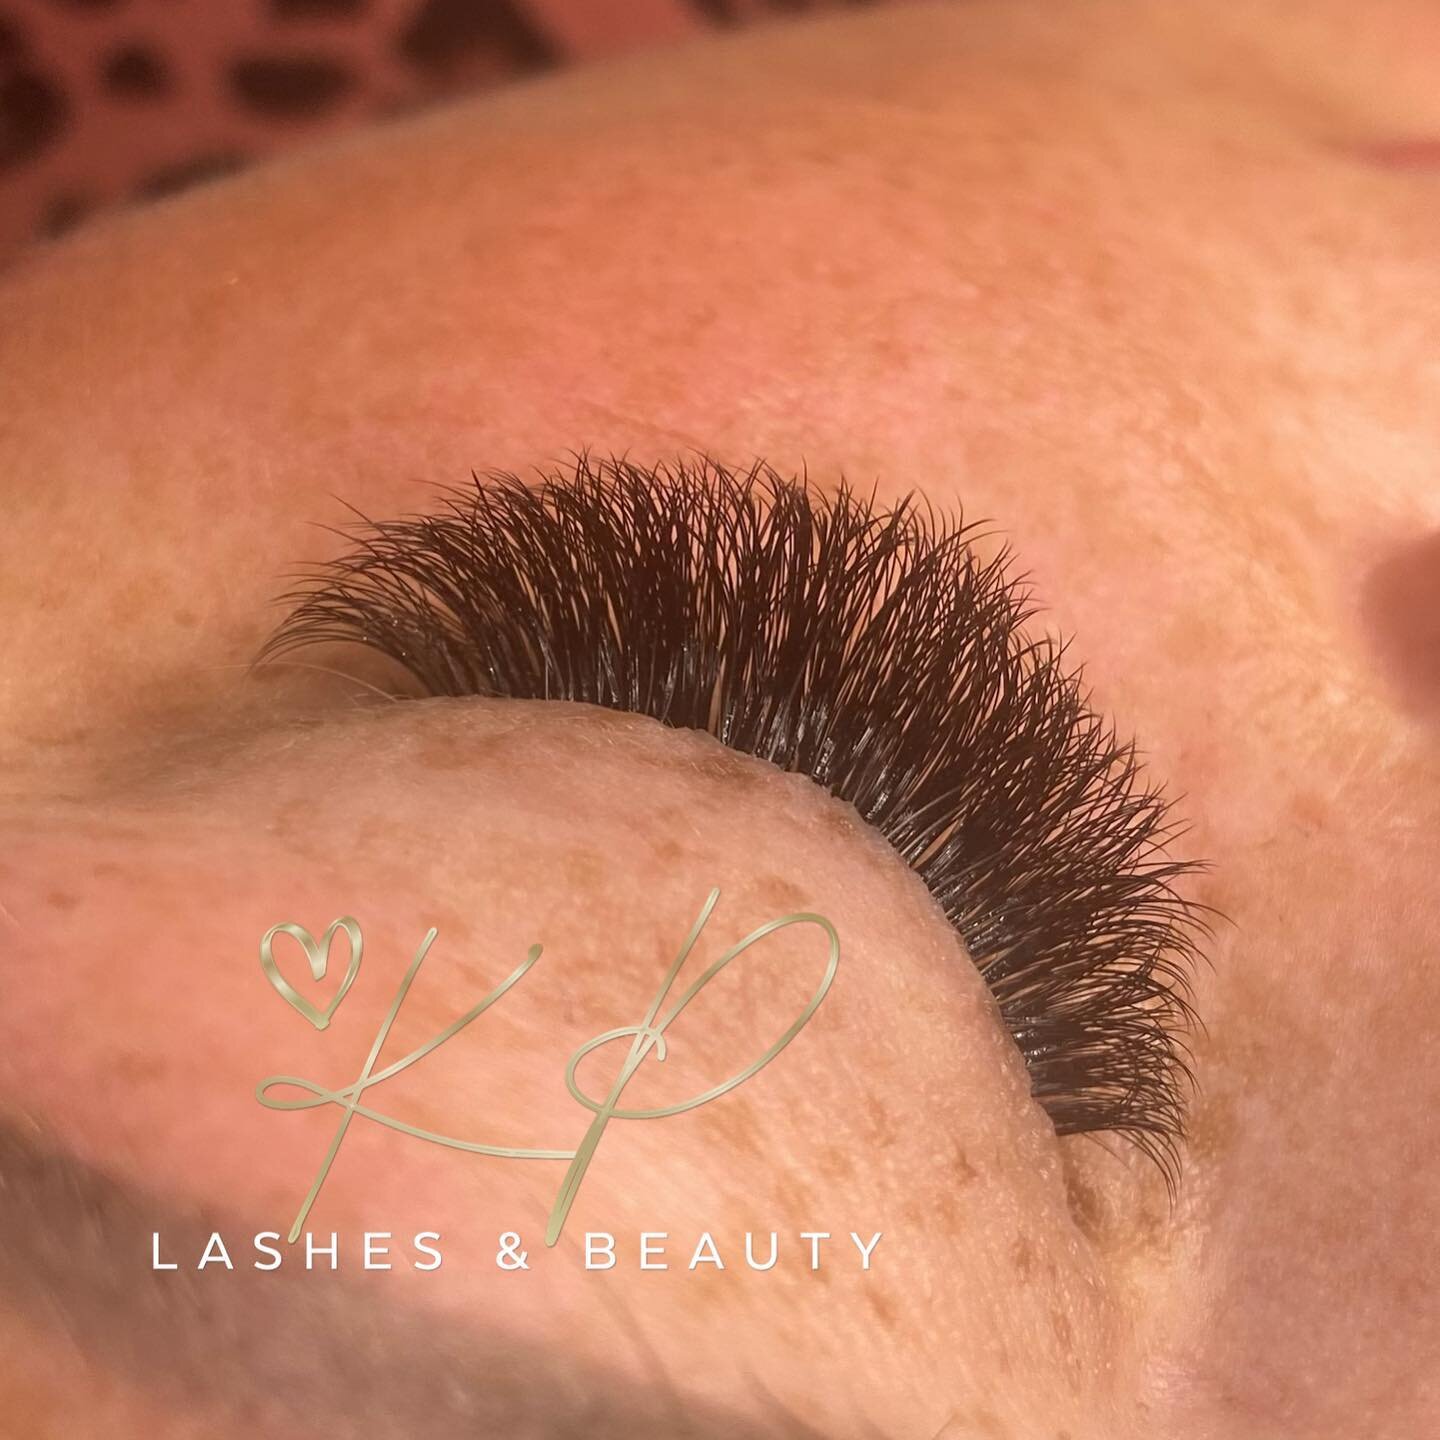 Could look at this volume for daysssss 🌥️

What do you prefer? Classic or Volume?

#russianvolume #russianvolumelashes #lashextensions #lashes #lashaddict #lashextension #volumelashes #volumefans #russianlashes #beauty #beautiful #mega volume #megav